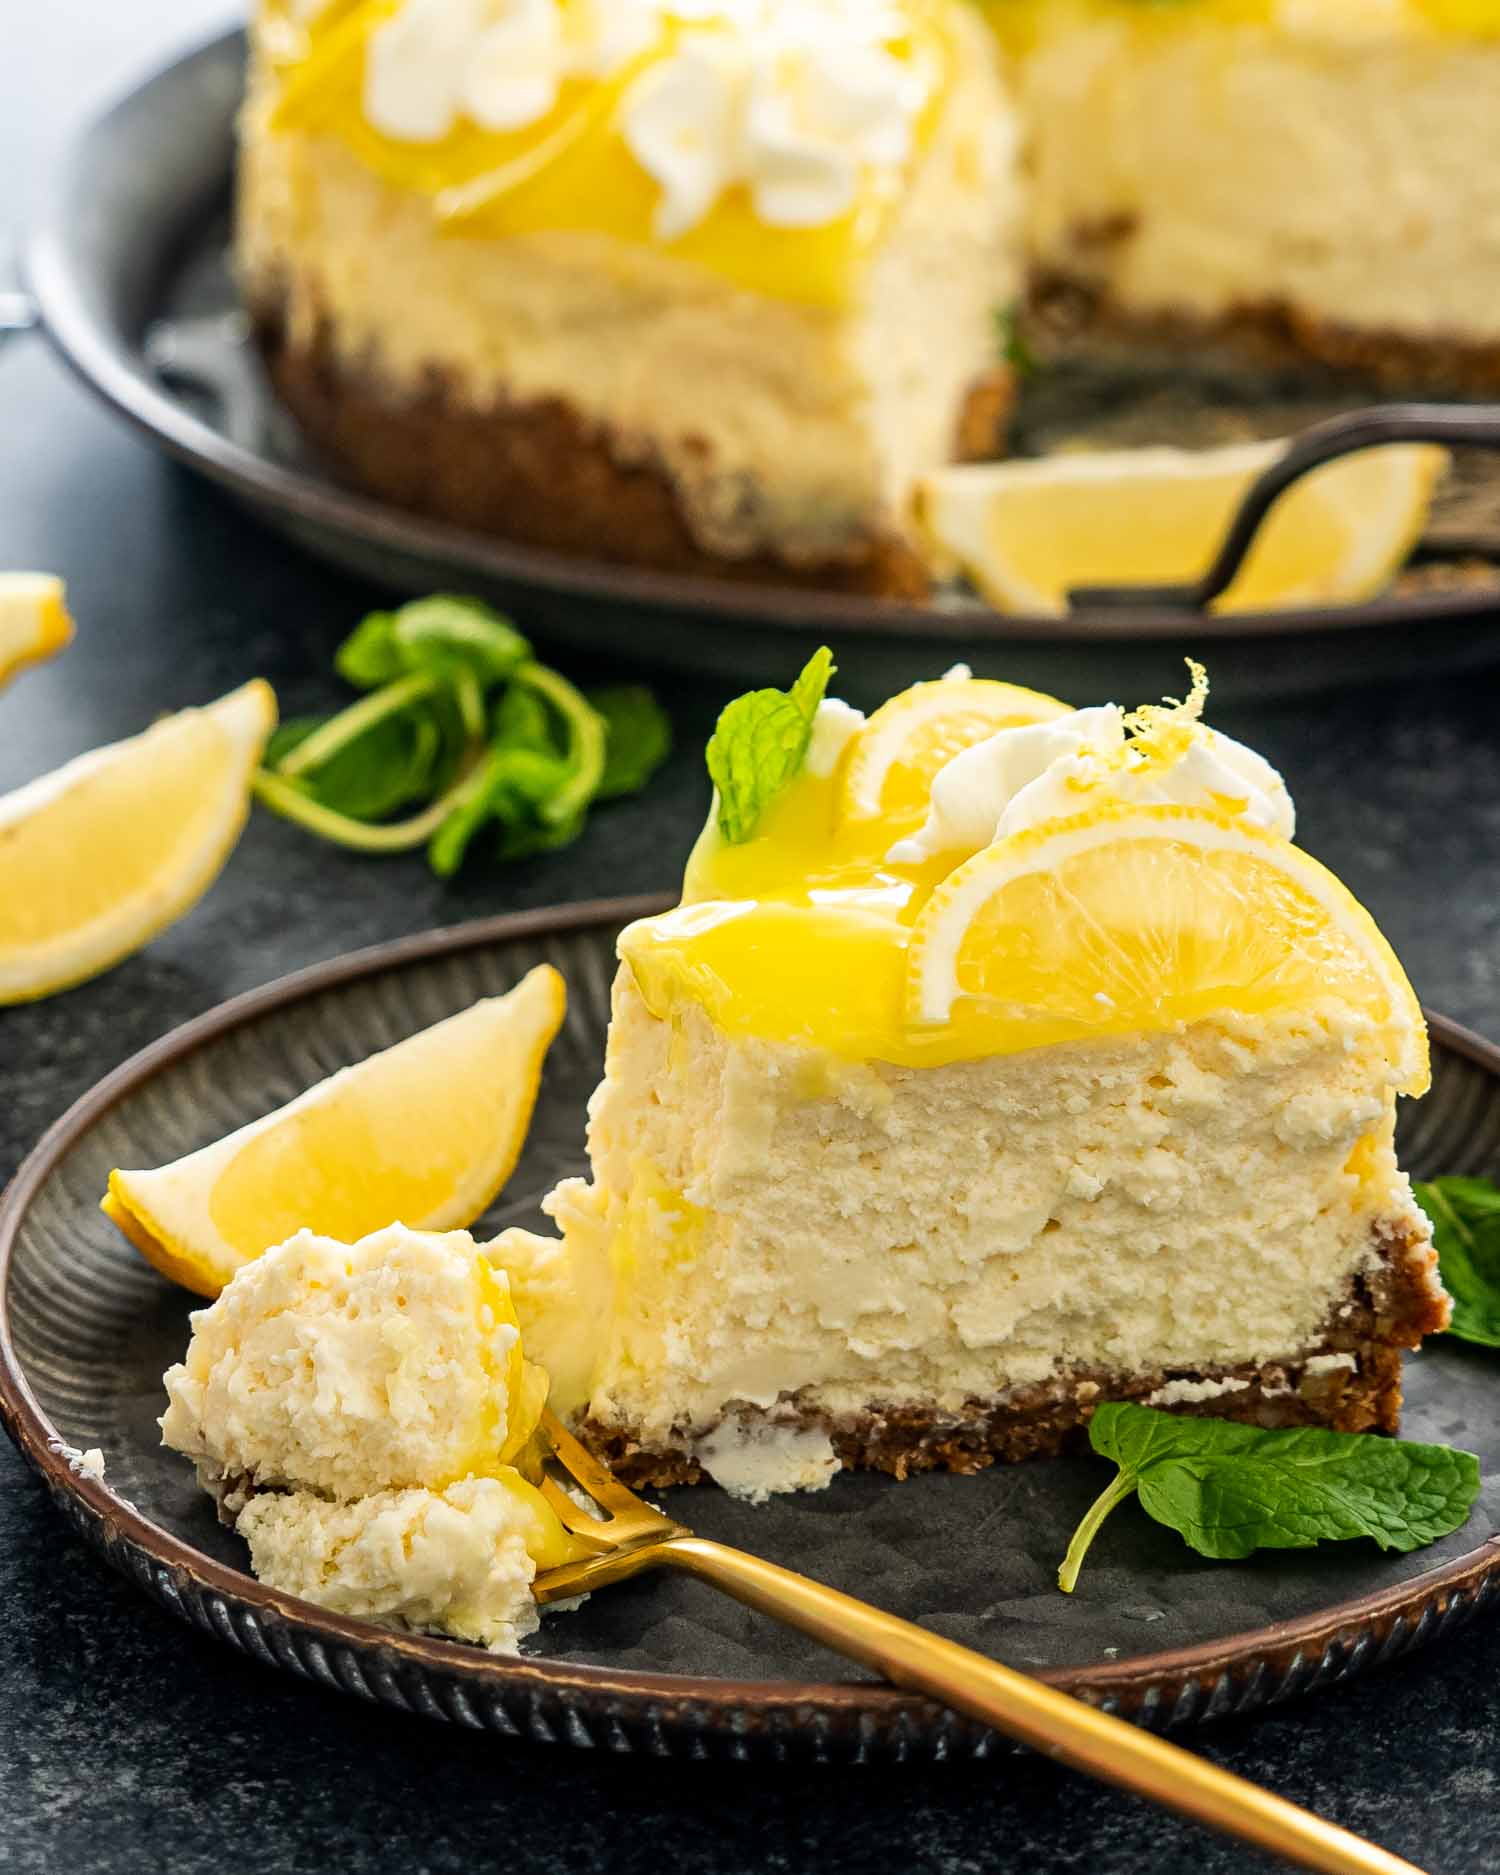 a slice of lemon cheesecake on a plate with a golden fork.